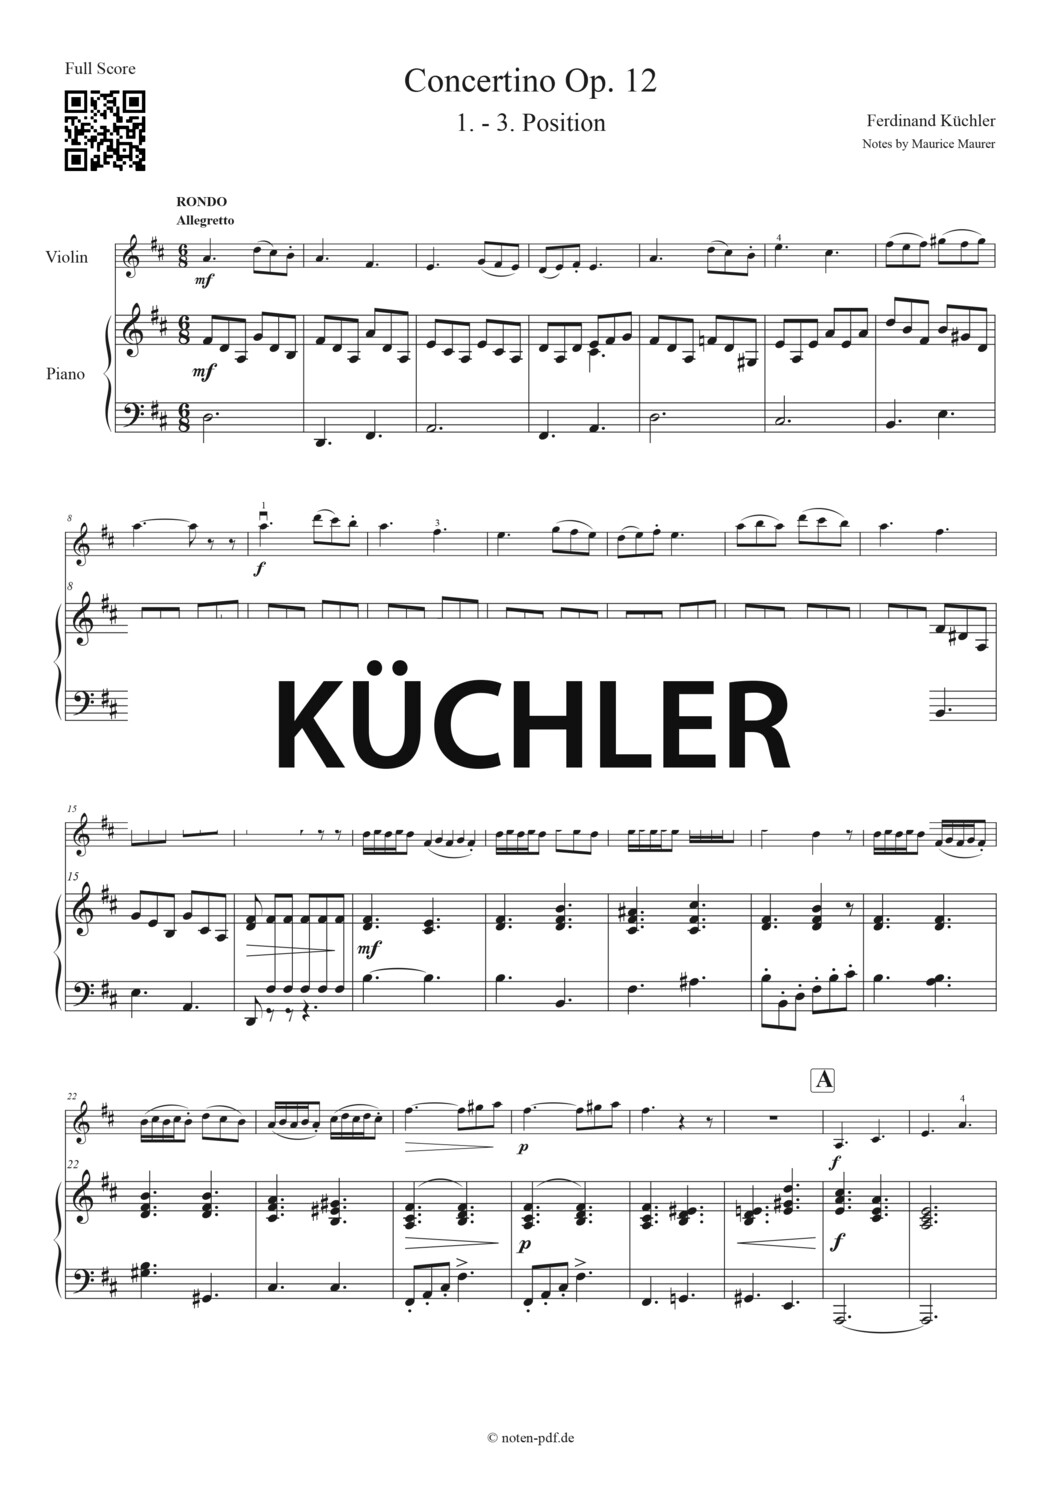 Küchler: Concertino Op. 12 - 3. Movement